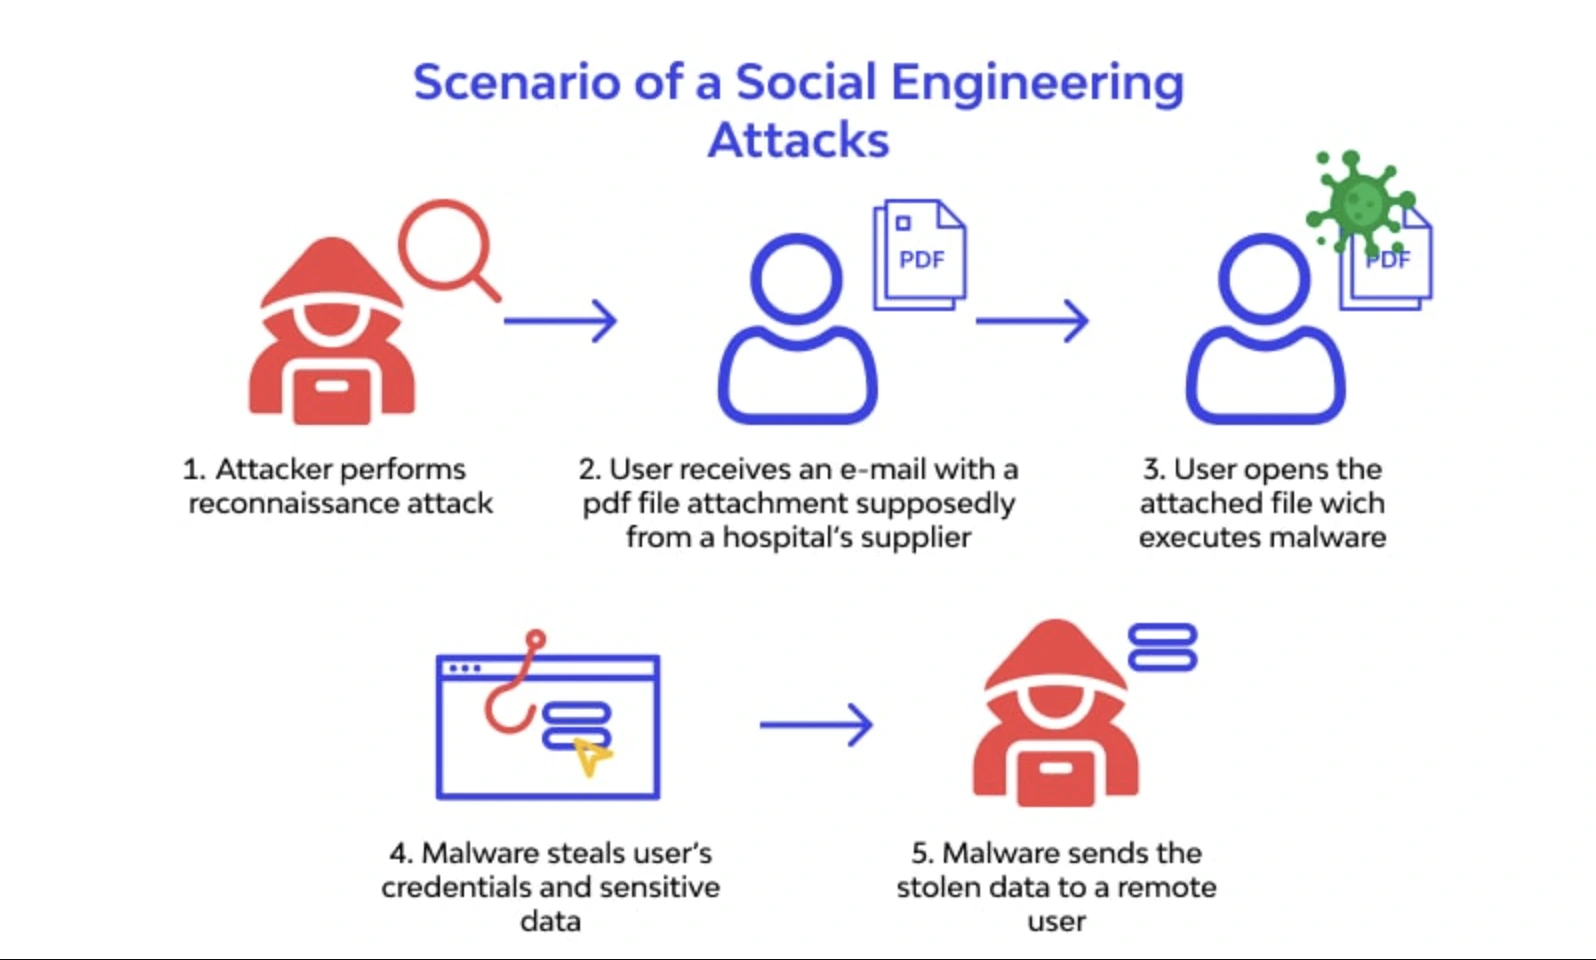 How does social engineering work